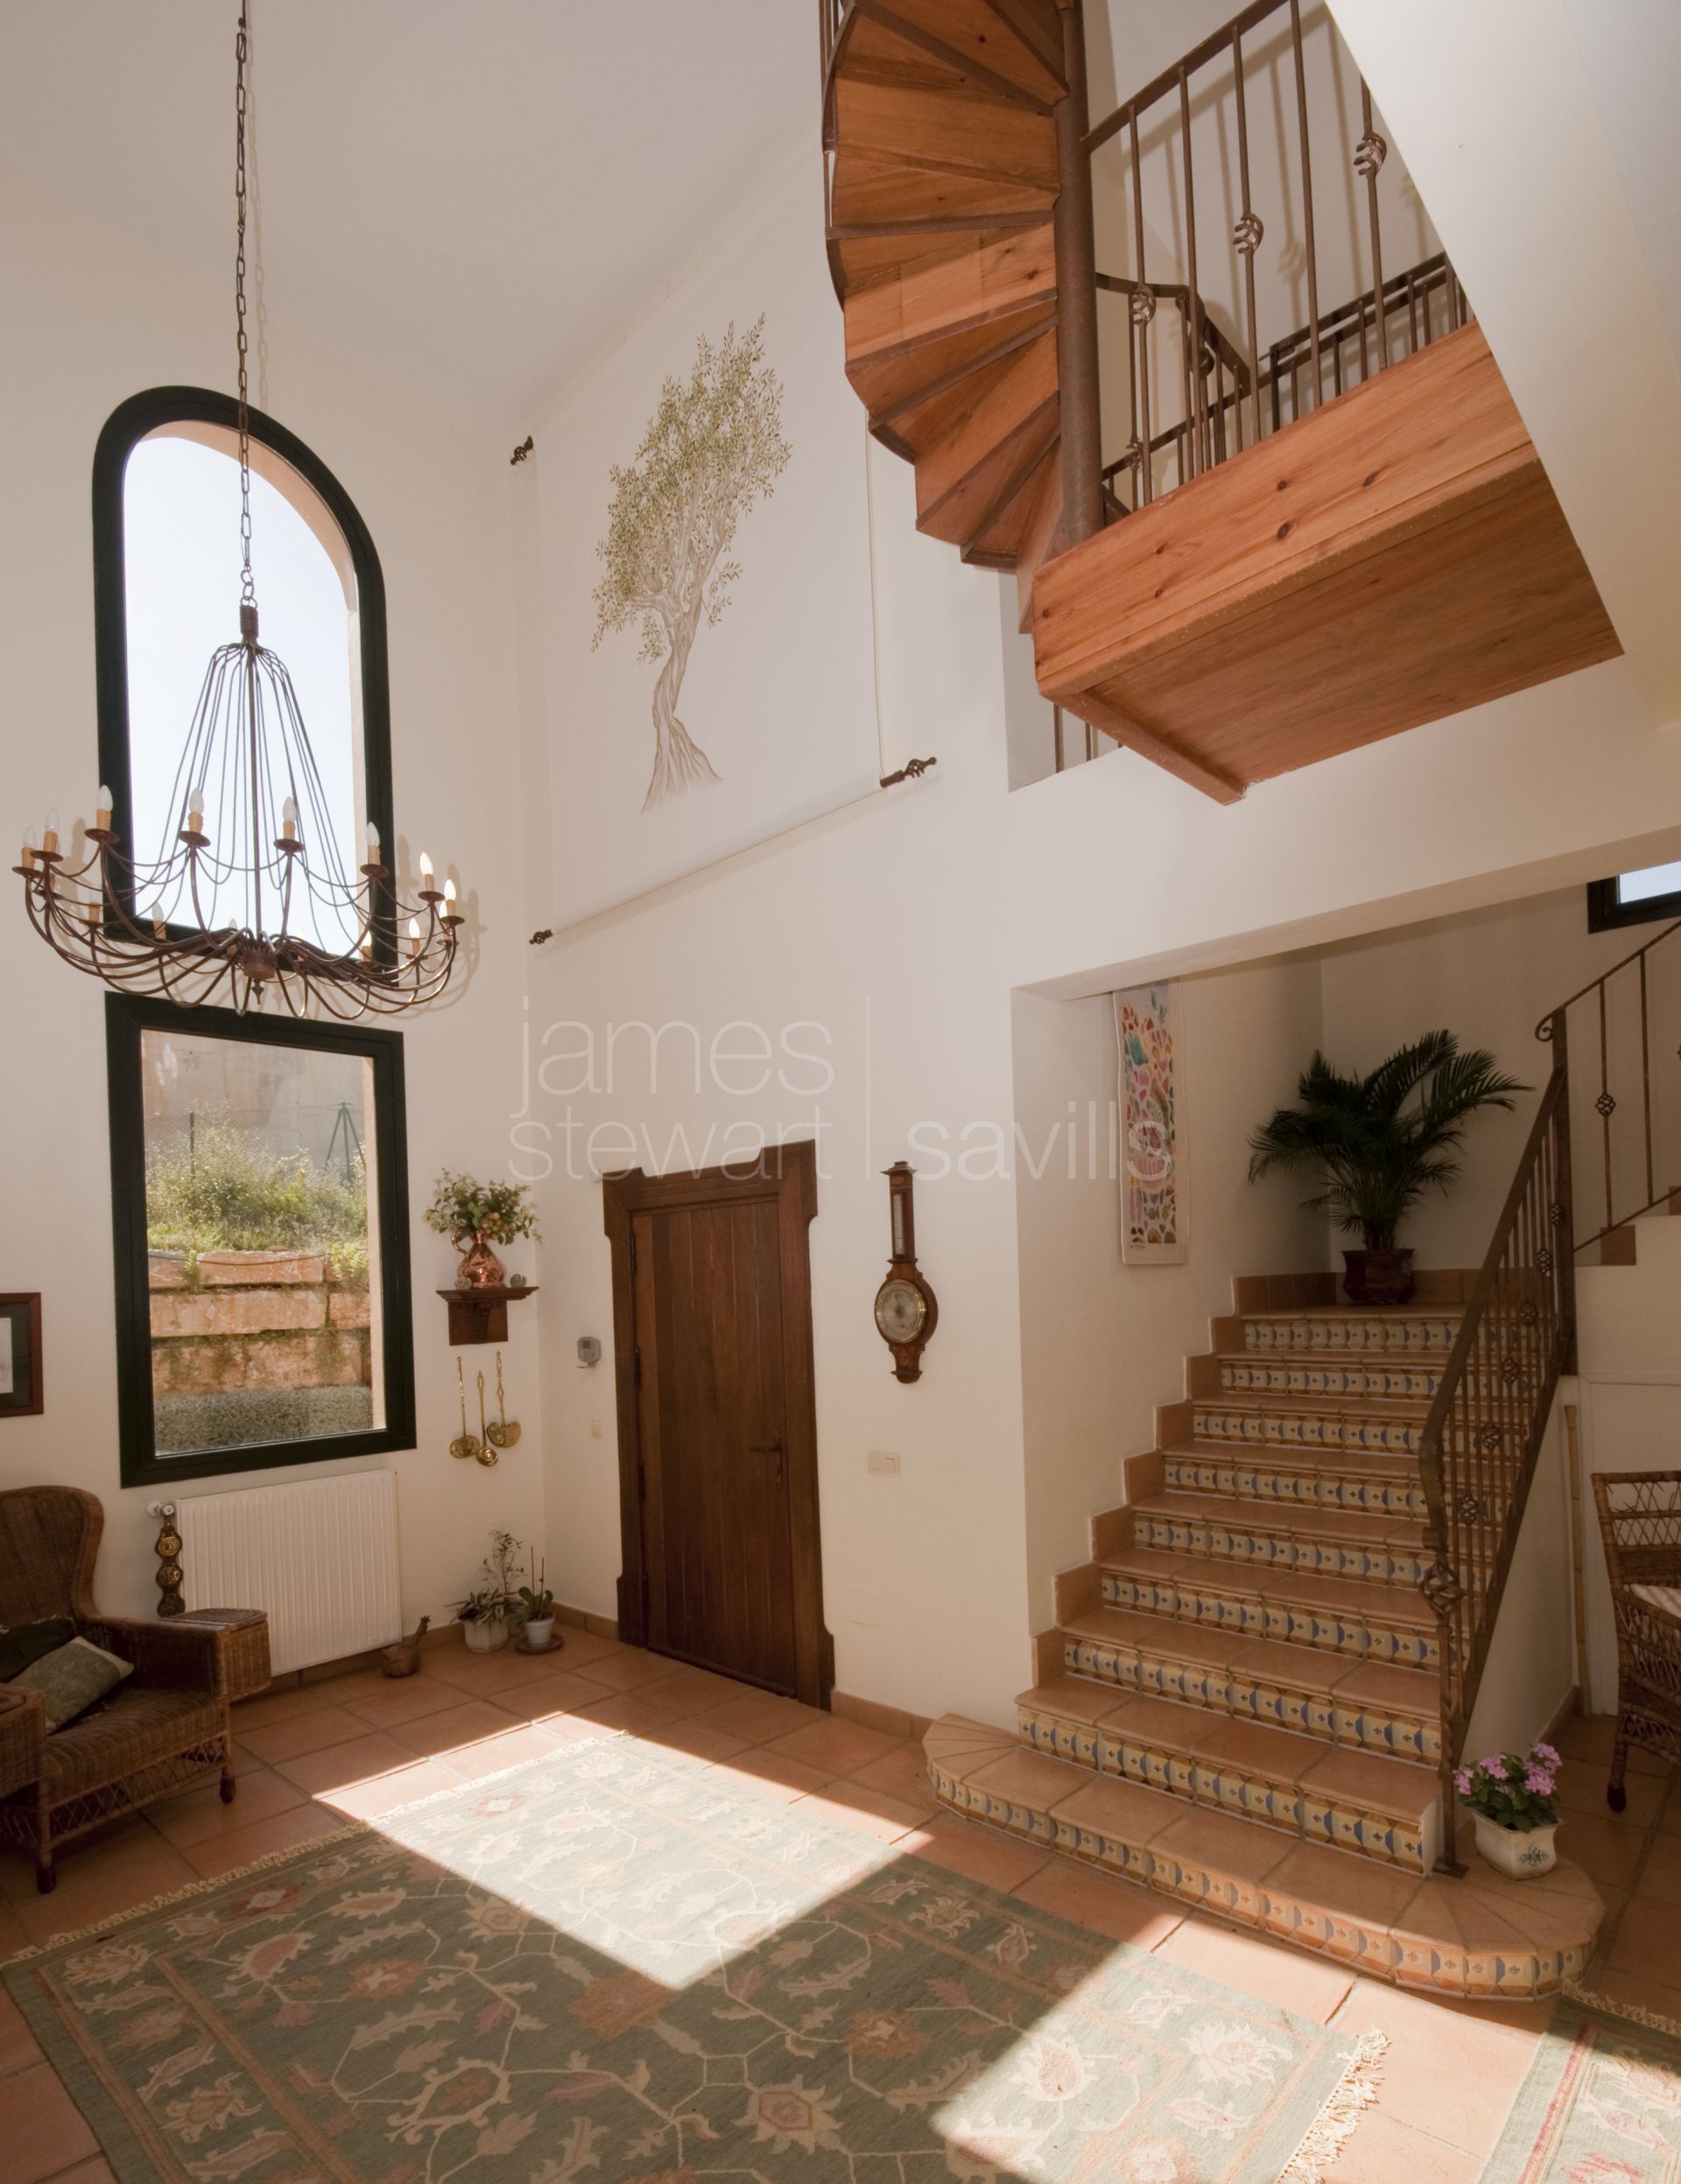 Wonderful Andaluz style villa with truly breathtaking views of the Mediterranean